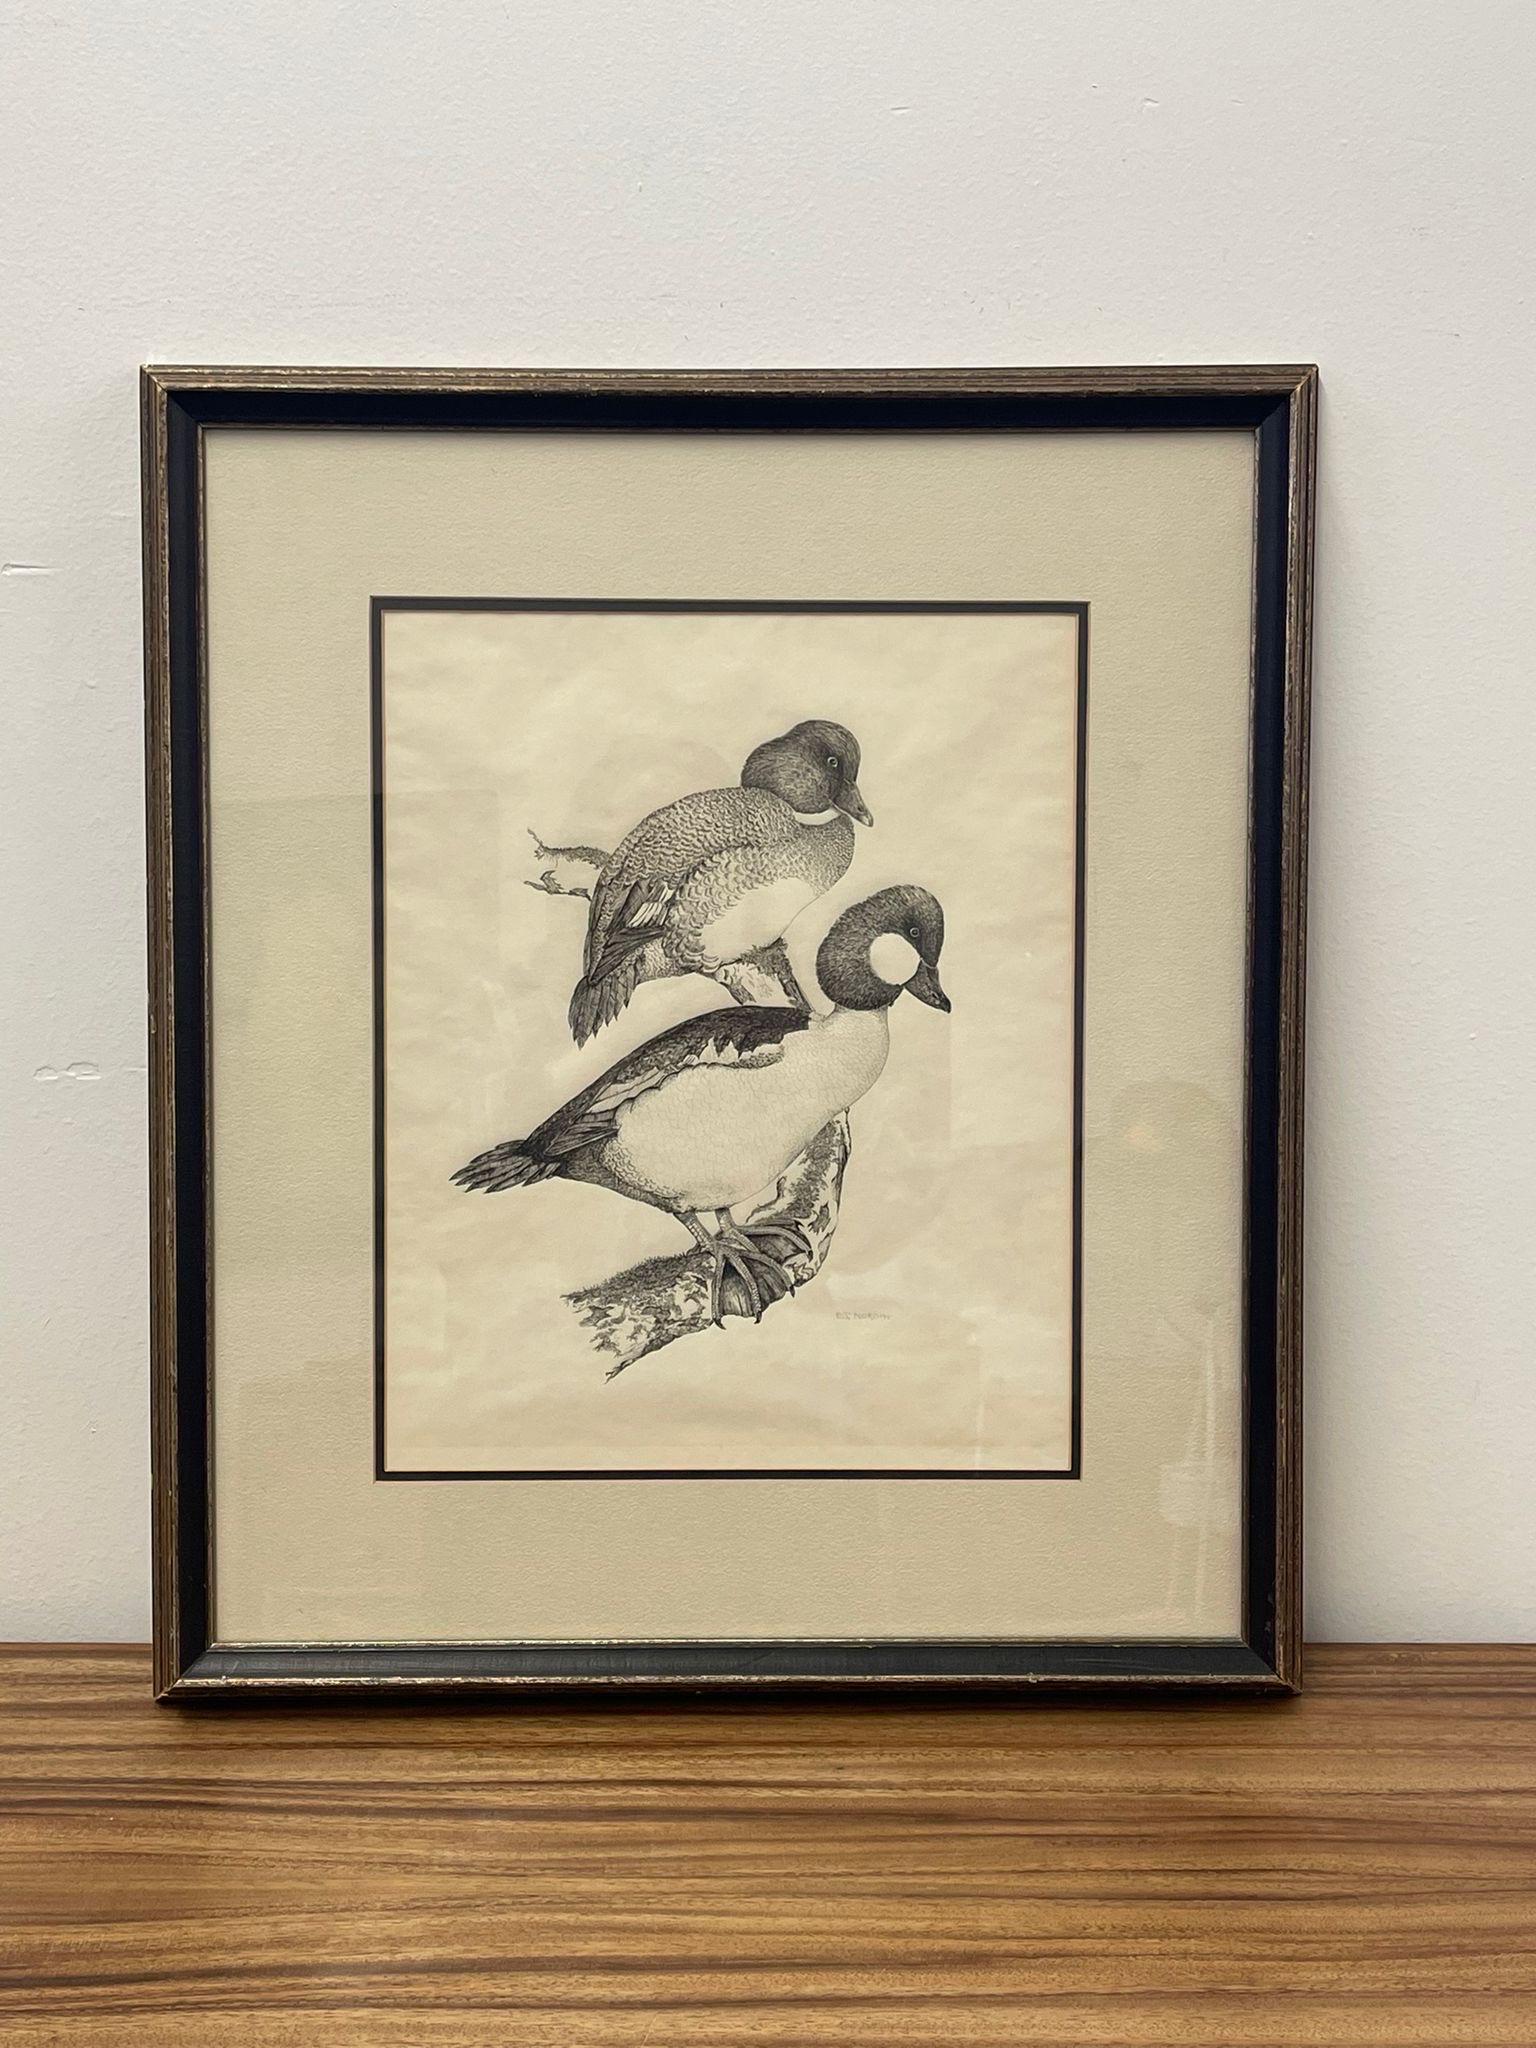 Possibly Pen on Paper. Unable to Verify if this Piece an Original or a Print Without Opening and Risking Damage. Signed in the Lower Corner. Vintage Condition Consistent with Age as Pictured.

Dimensions. 21 W ; 1/4 D ; 24 1/2 Has 